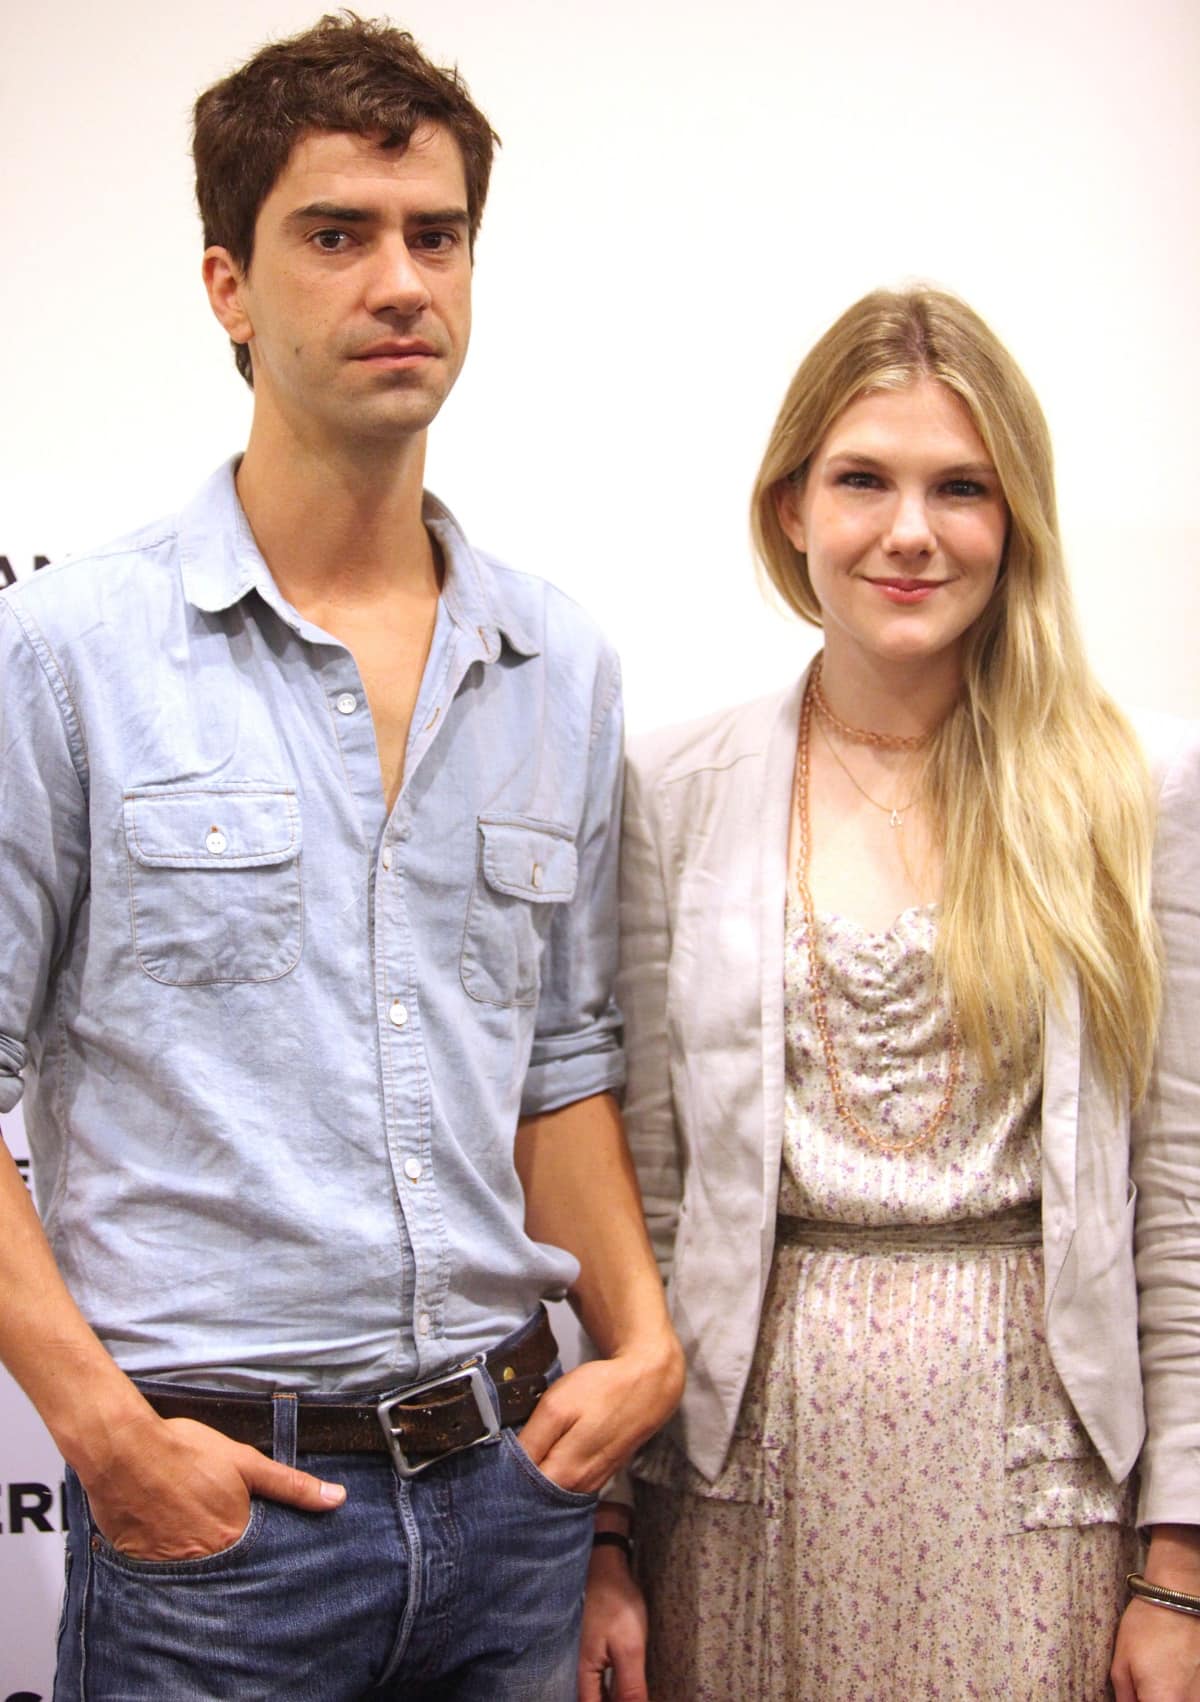 Prior to their work on "The Merchant of Venice" in 2010, Hamish Linklater and Lily Rabe had encountered each other on several occasions